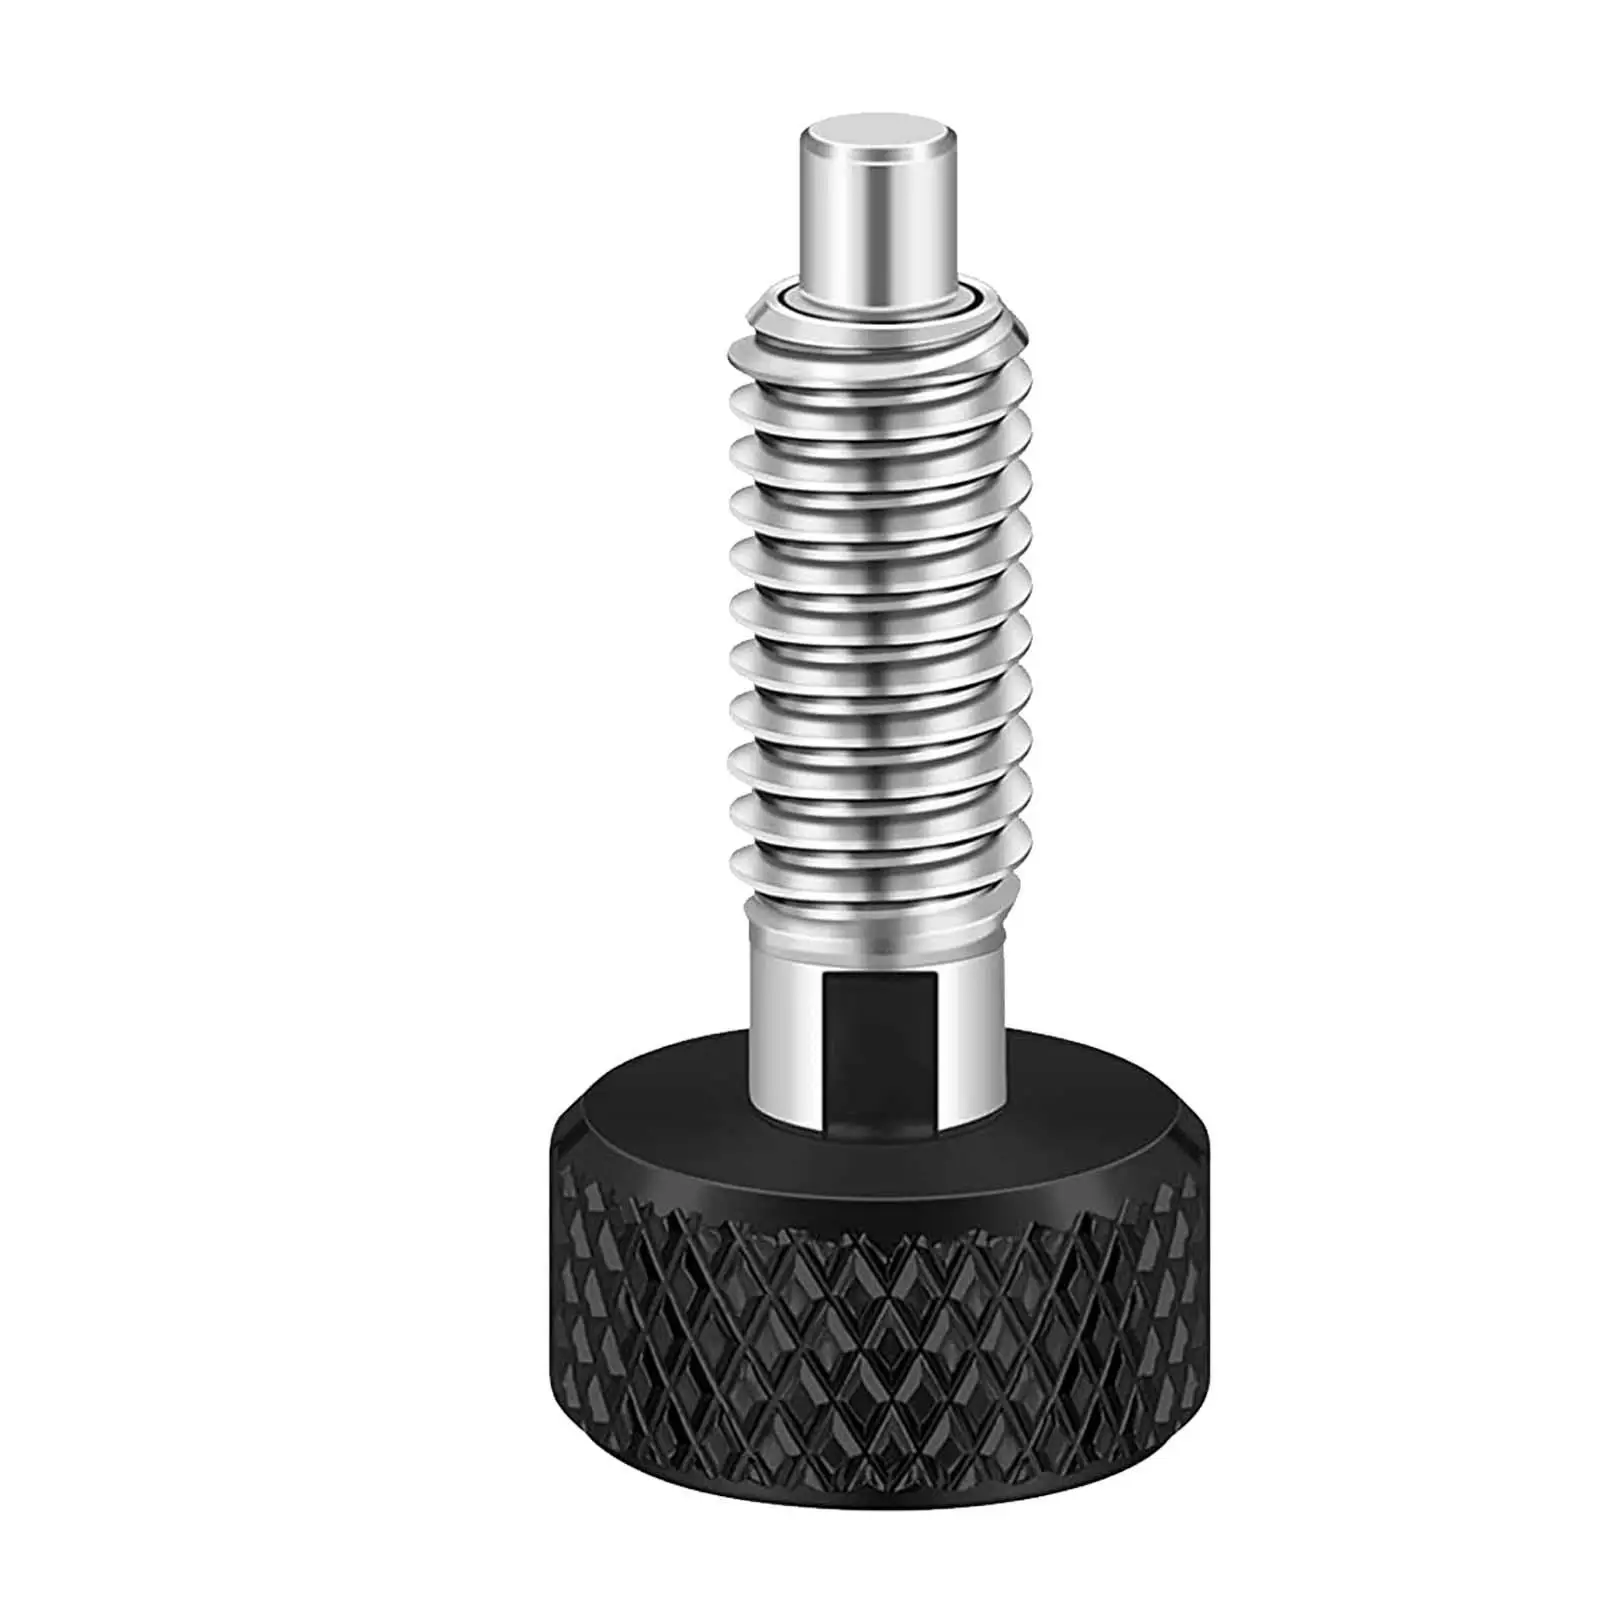 Retractable Plunger with Knurled Handle Lightweight Sturdy M6 Quick Release Pins for Engine Rooms Rolling Tool Boxes Automobiles